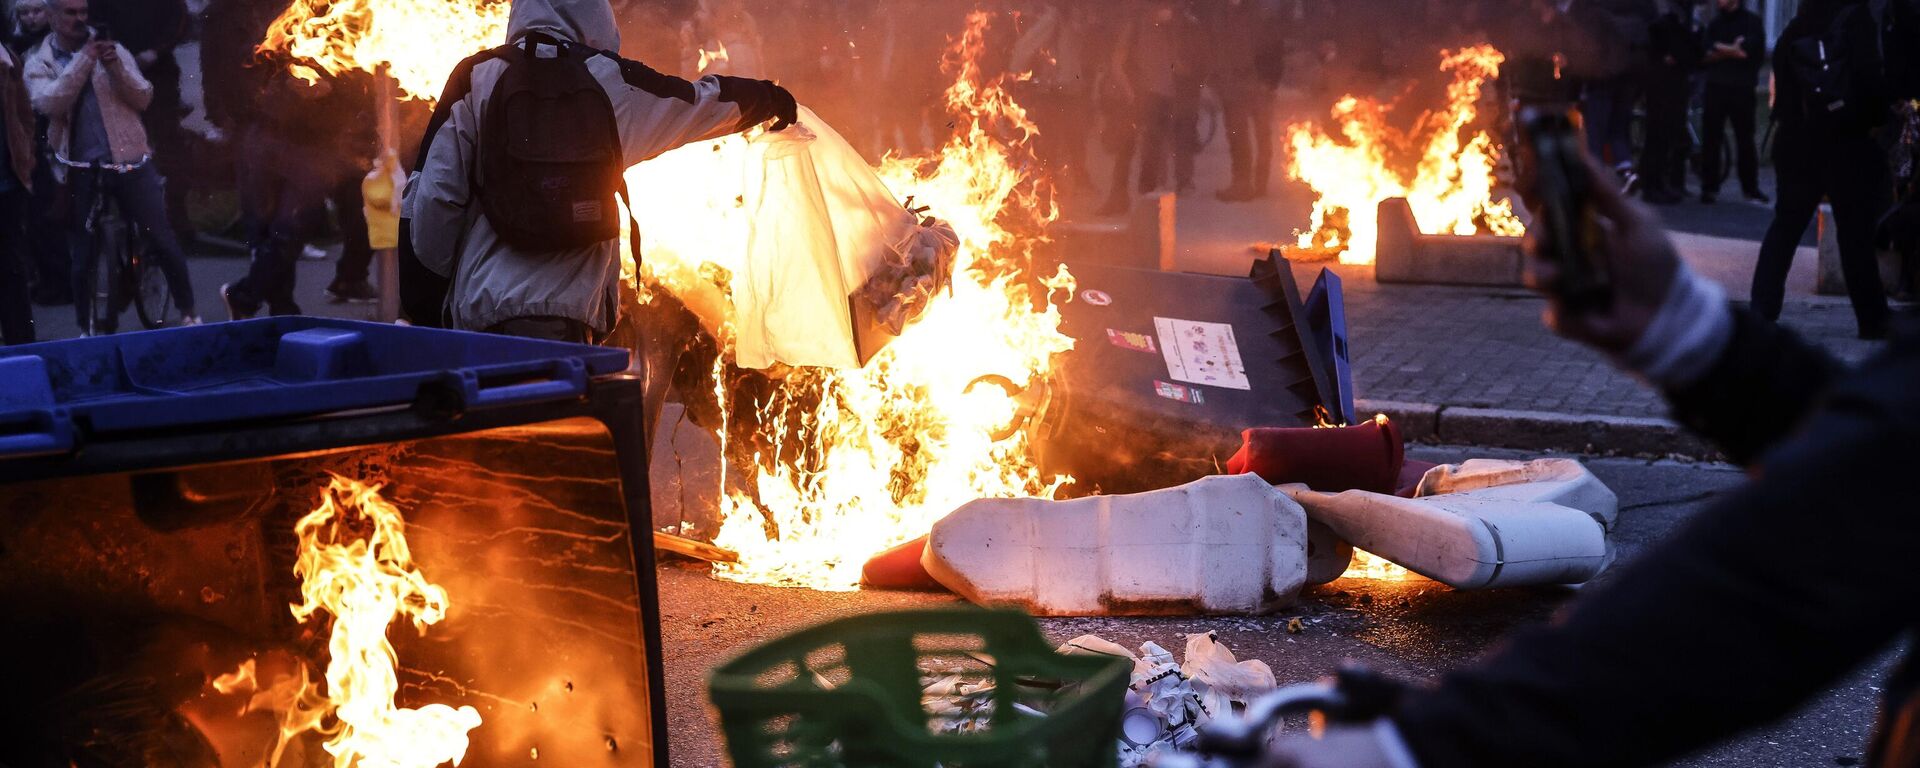 Protesters burn dustbins at the end of a demonstration in Strasbourg, France, Thursday, March 23, 2023. French unions are holding their first mass demonstrations Thursday since President Emmanuel Macron enflamed public anger by forcing a higher retirement age through parliament without a vote. - Sputnik International, 1920, 24.03.2023